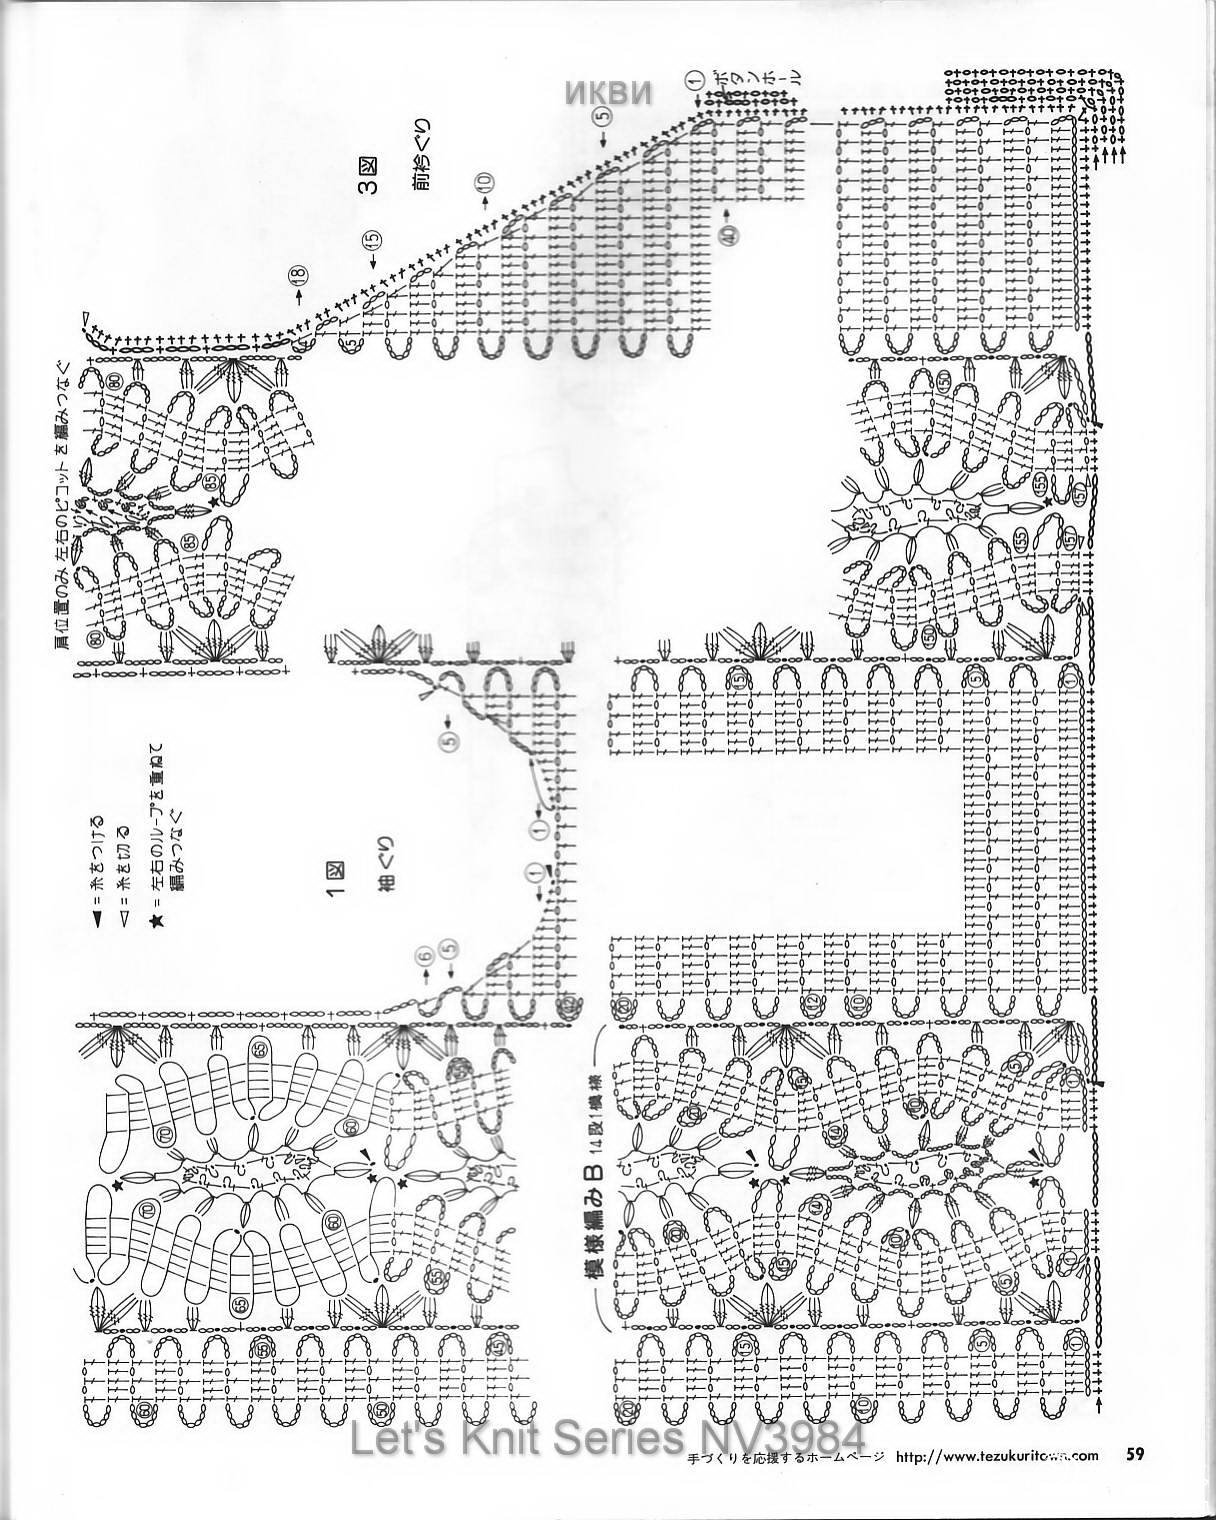 Let's Knit Series NV3984_Page059.JPG